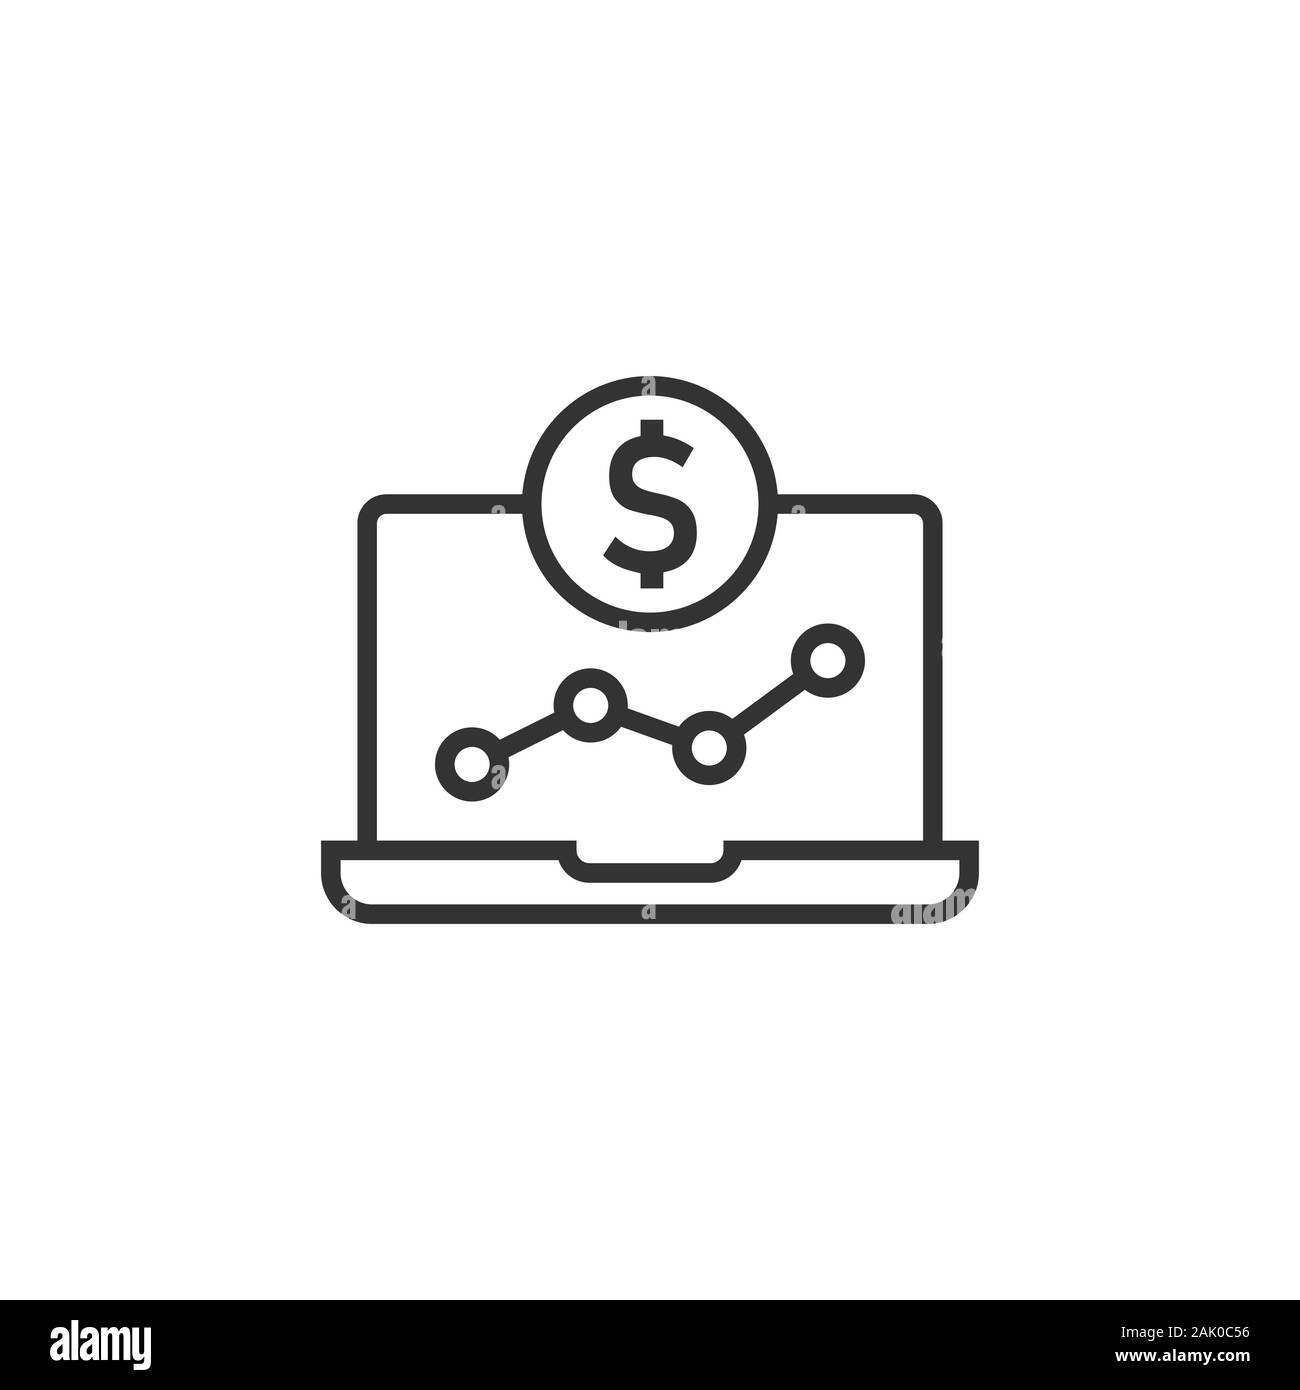 Laptop computer chart icon in flat style. Money diagram vector illustration on white isolated background. Financial process business concept. Stock Vector